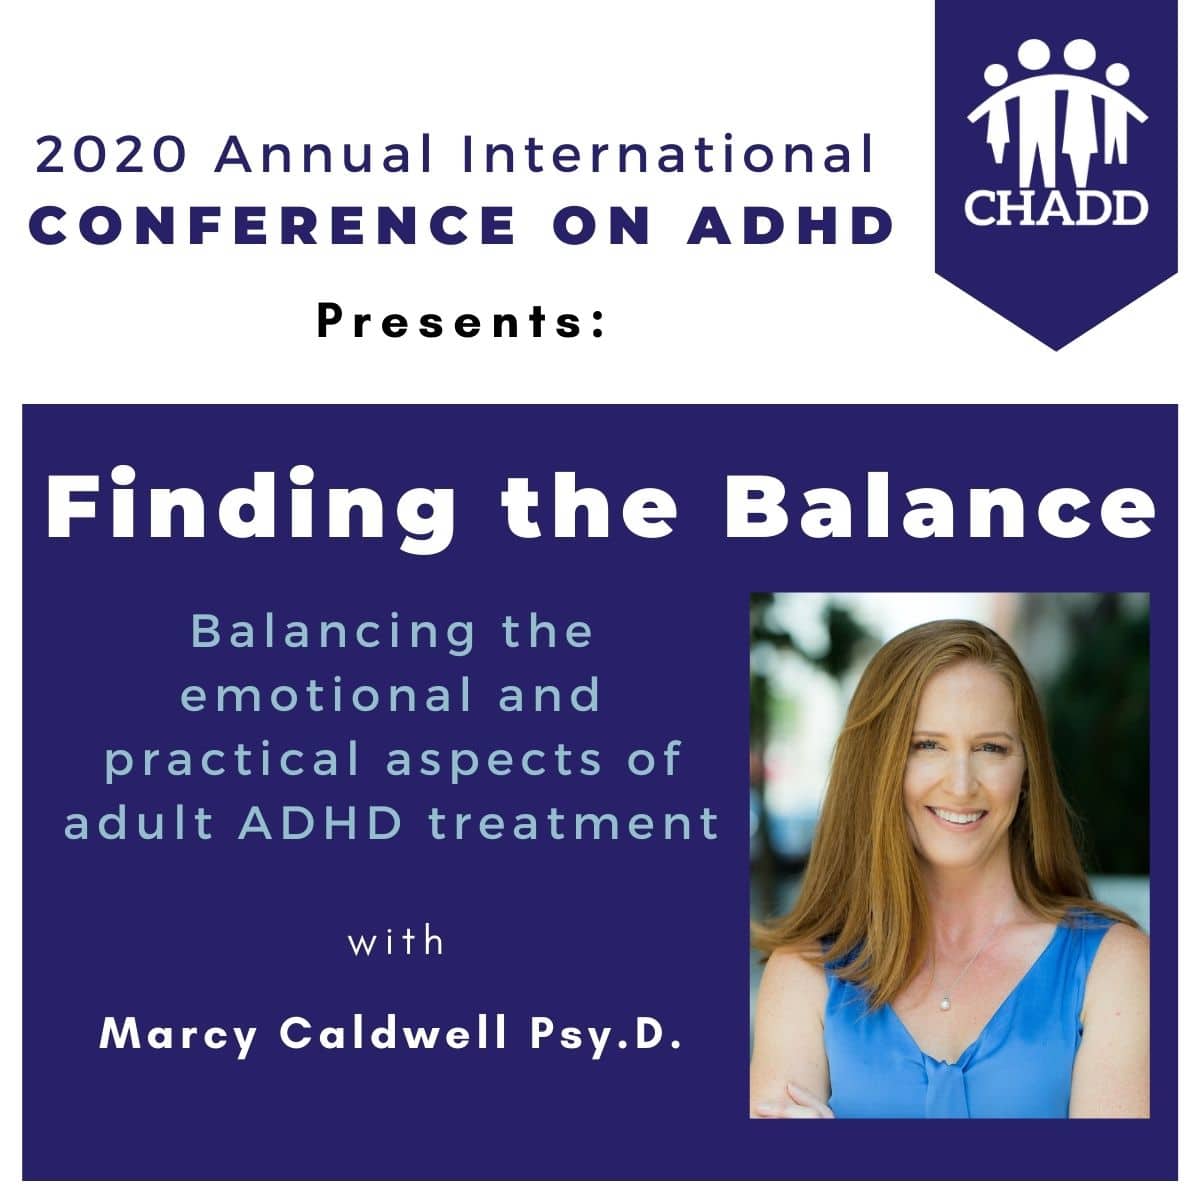 2020 International Conference on ADHD: Finding the balance